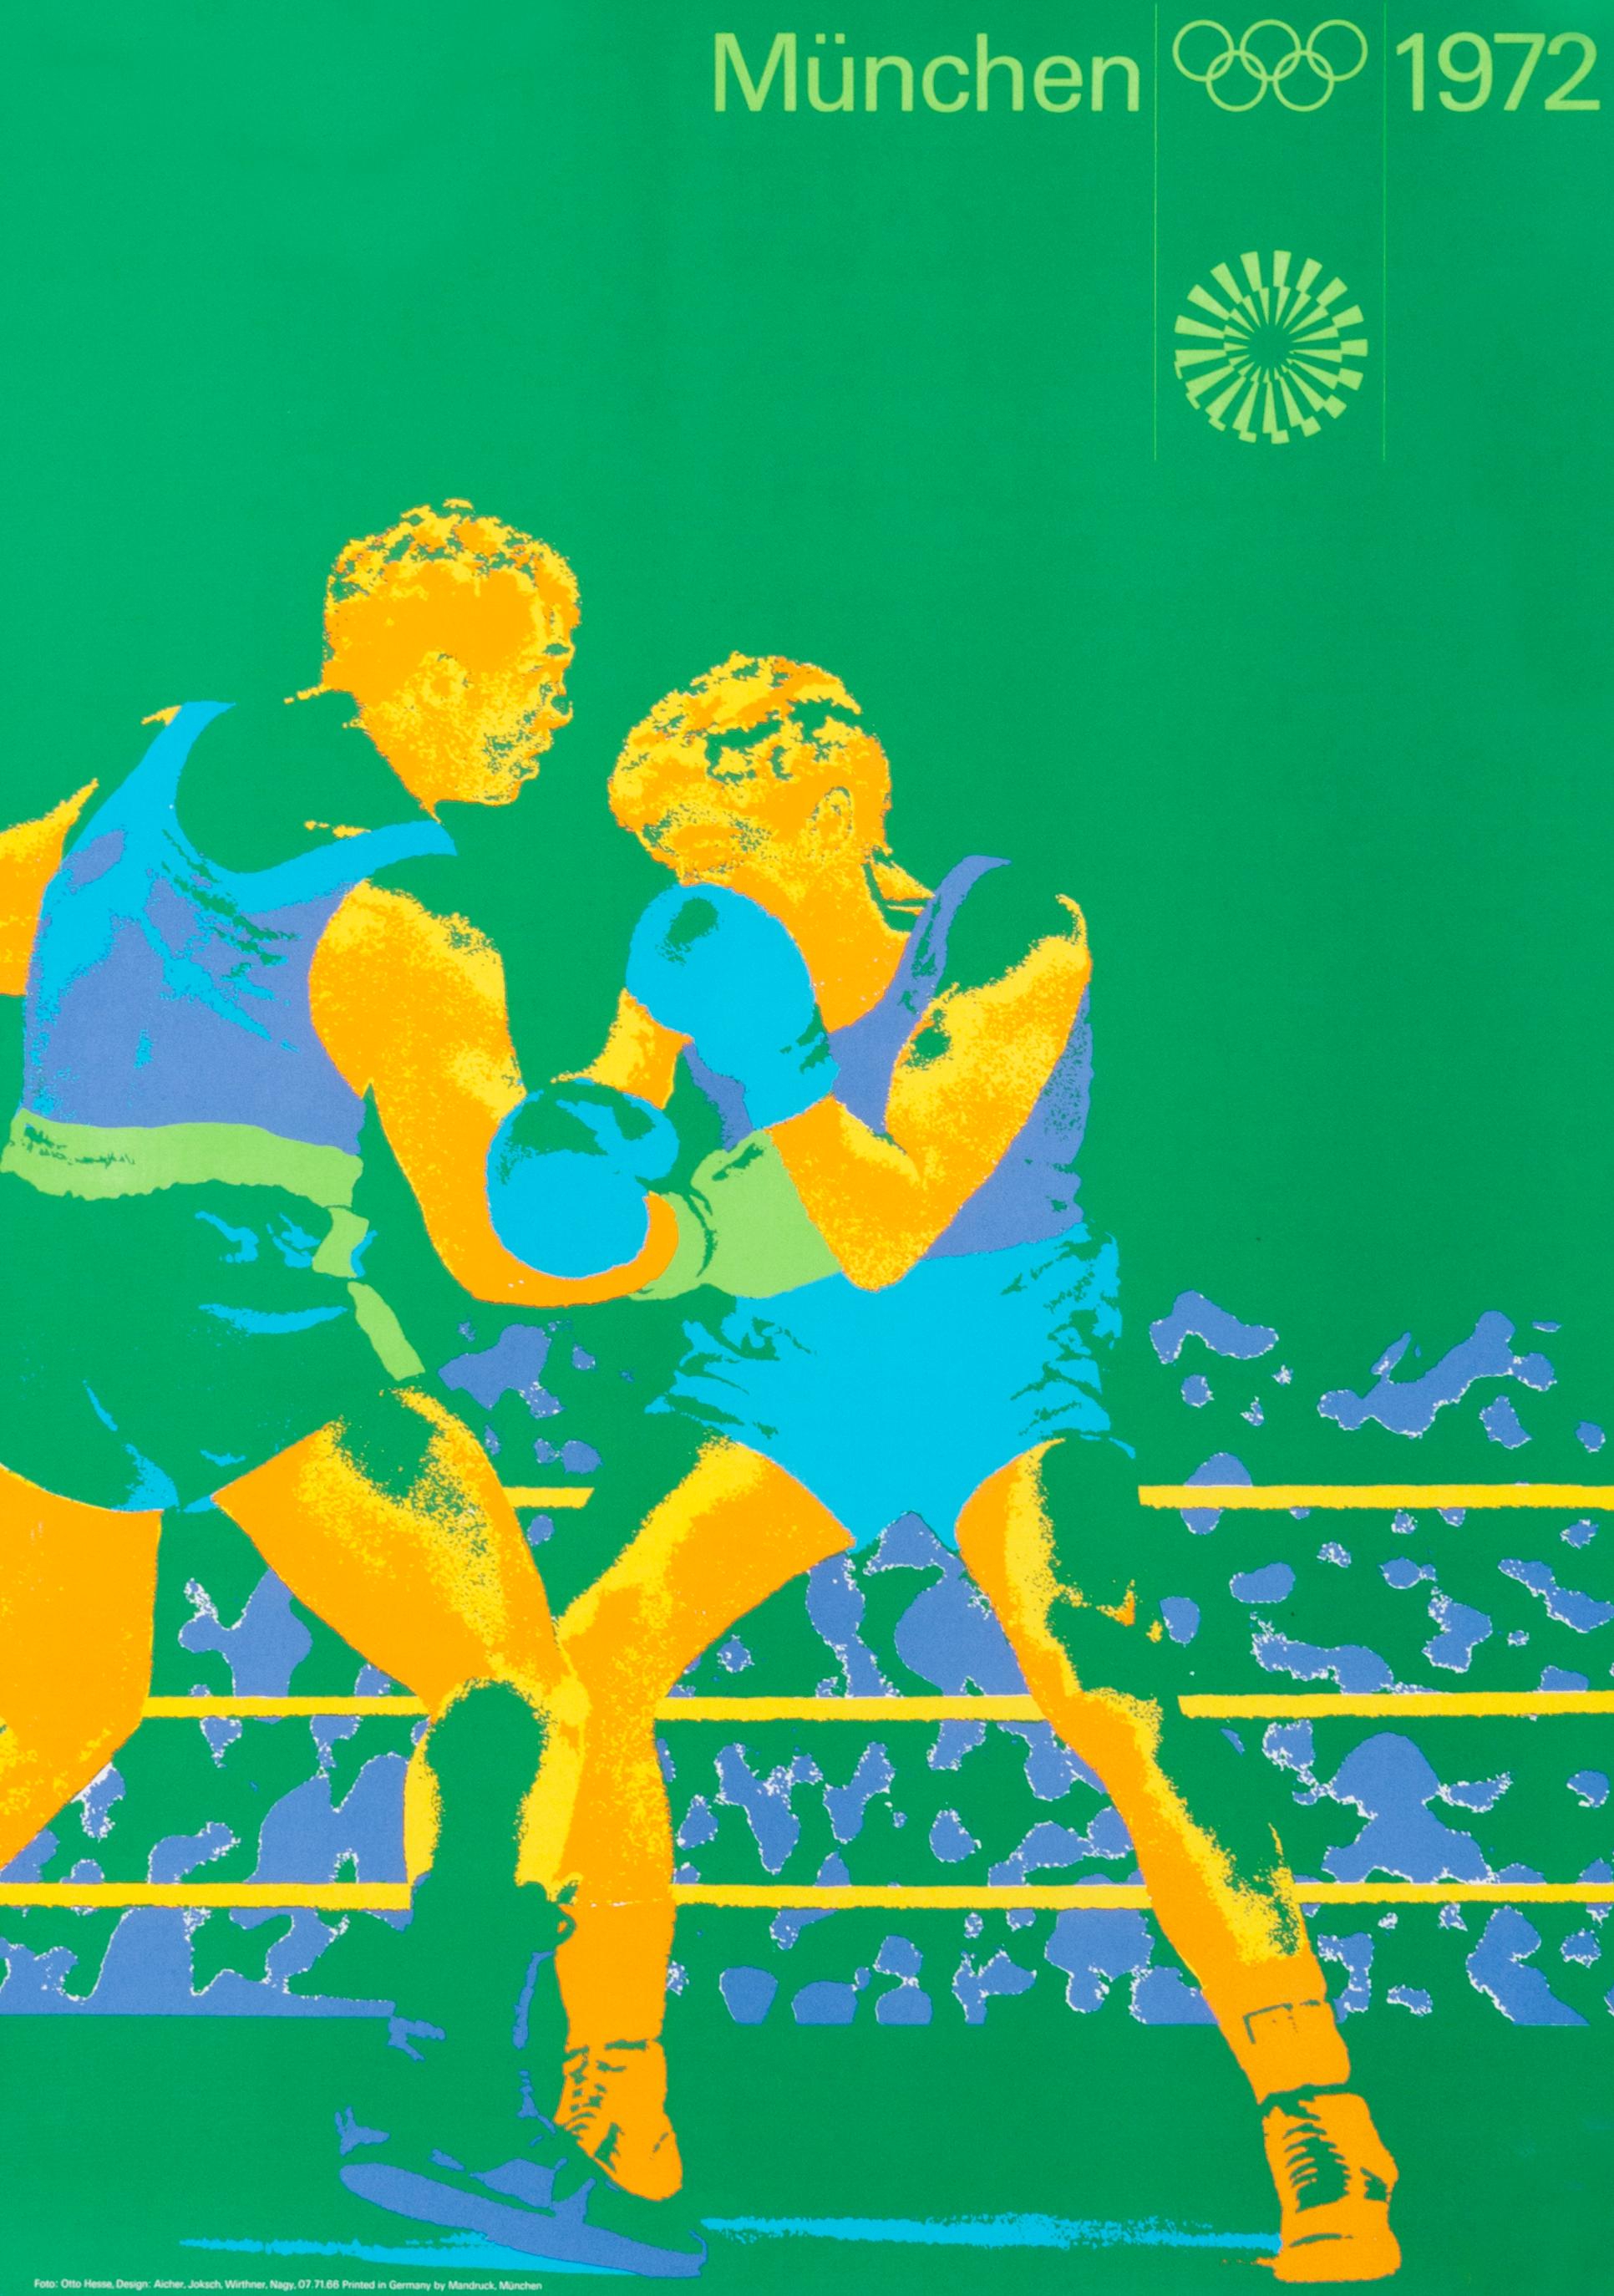 "Olympic Games 1972 - Boxing (small)" Munich Sports Original Vintage Poster - Print by Otl Aicher